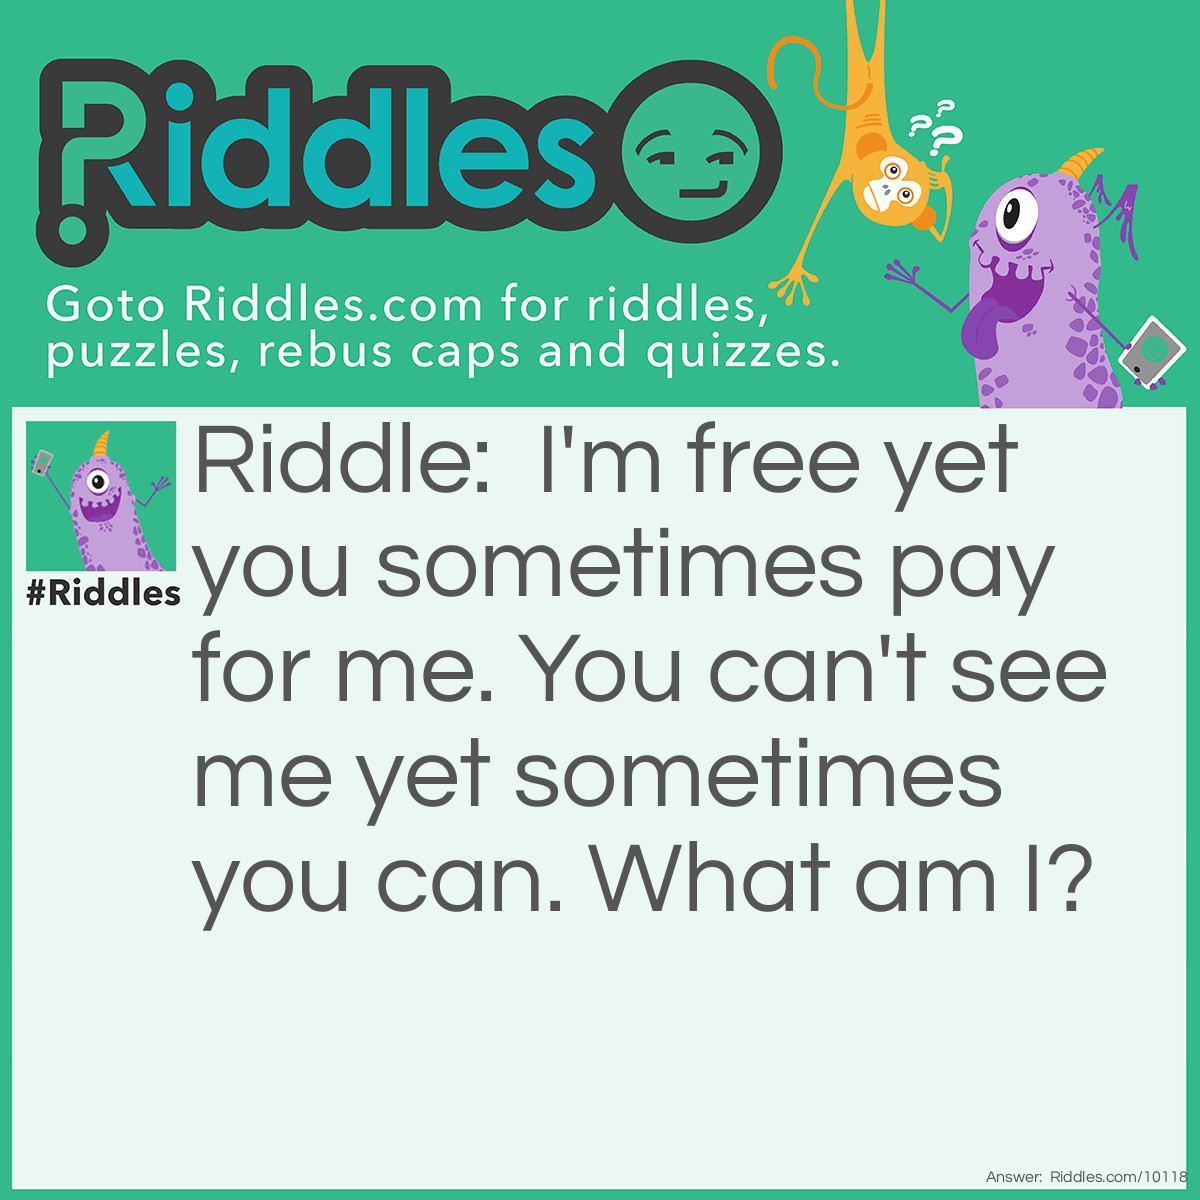 Riddle: I'm free yet you sometimes pay for me. You can't see me yet sometimes you can. What am I? Answer: Air.